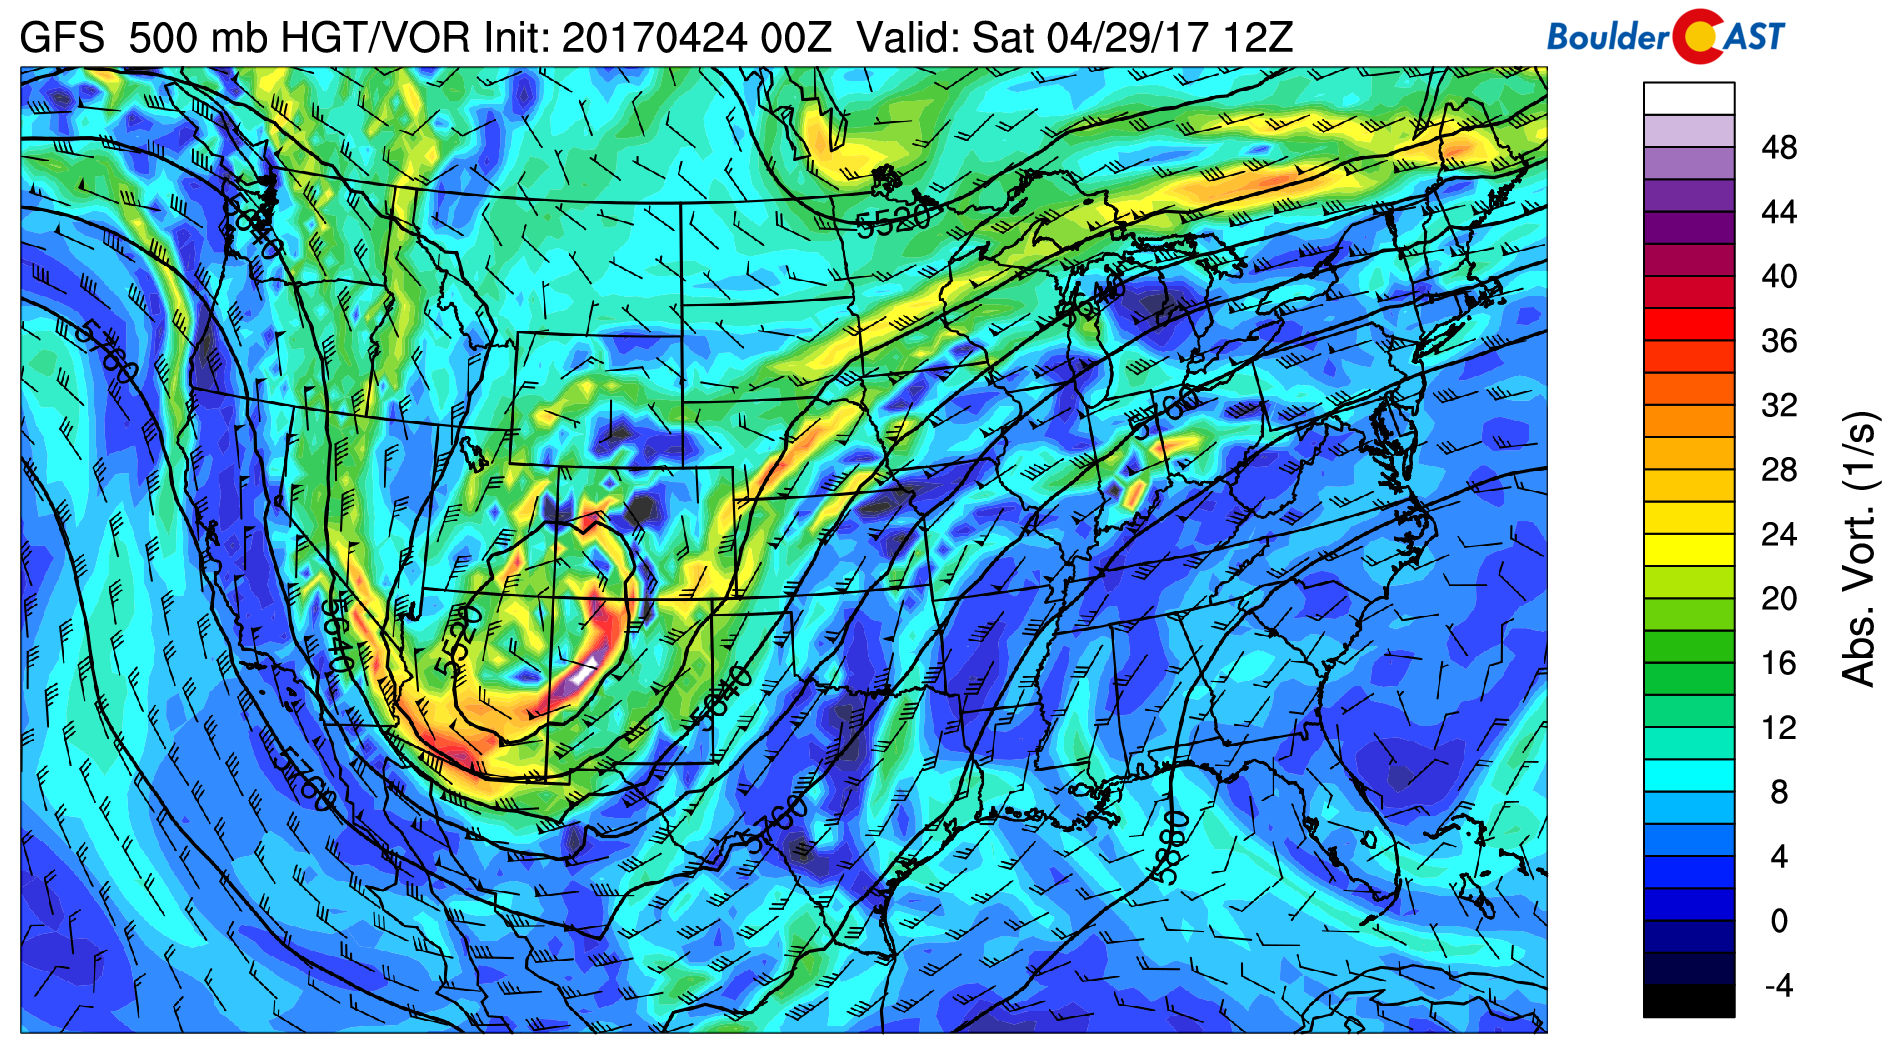 GFS 500 mb absolute vorticity for Saturday